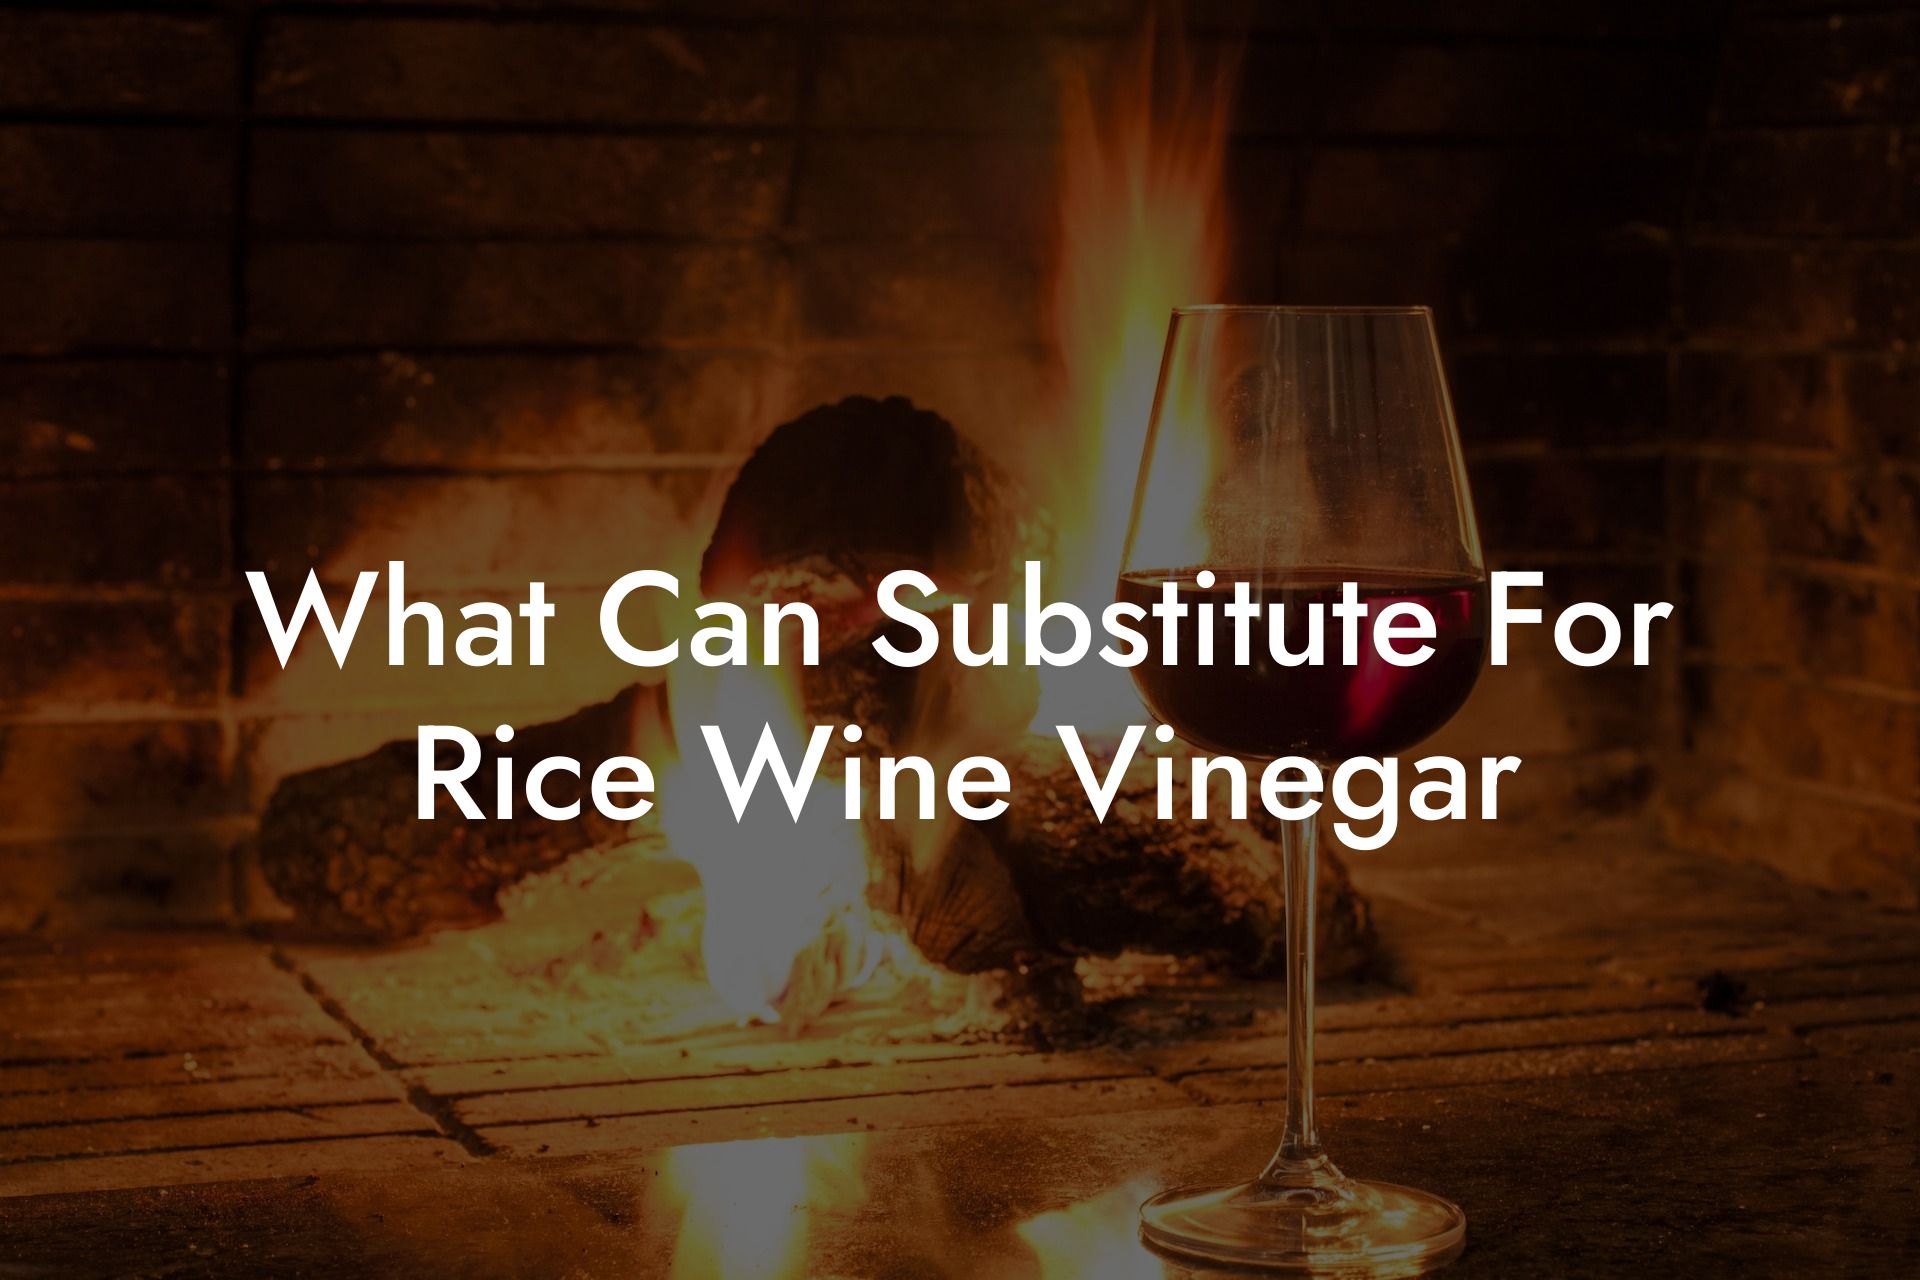 What Can Substitute For Rice Wine Vinegar